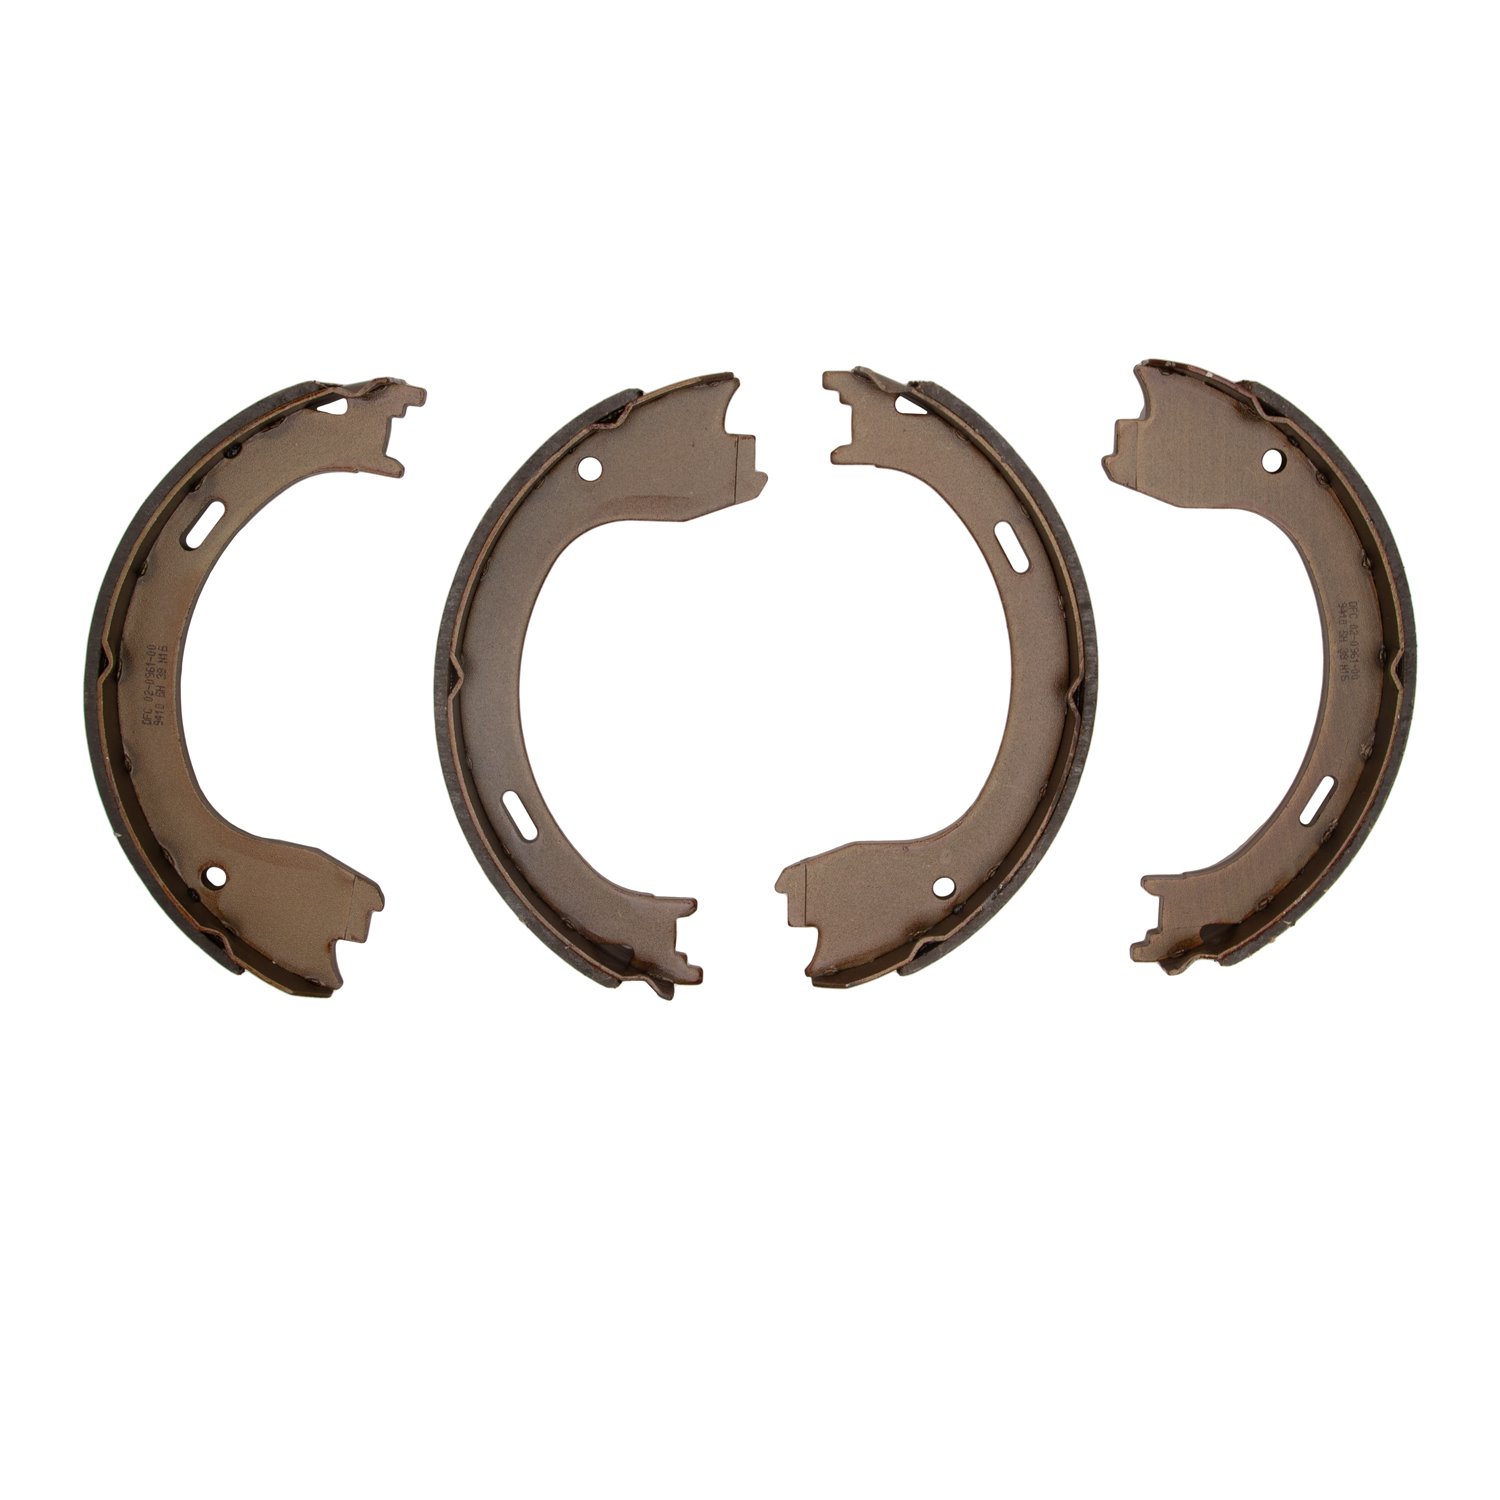 1902-0961-00 Parking Brake Shoes, 2009-2011 Ford/Lincoln/Mercury/Mazda, Position: Parking